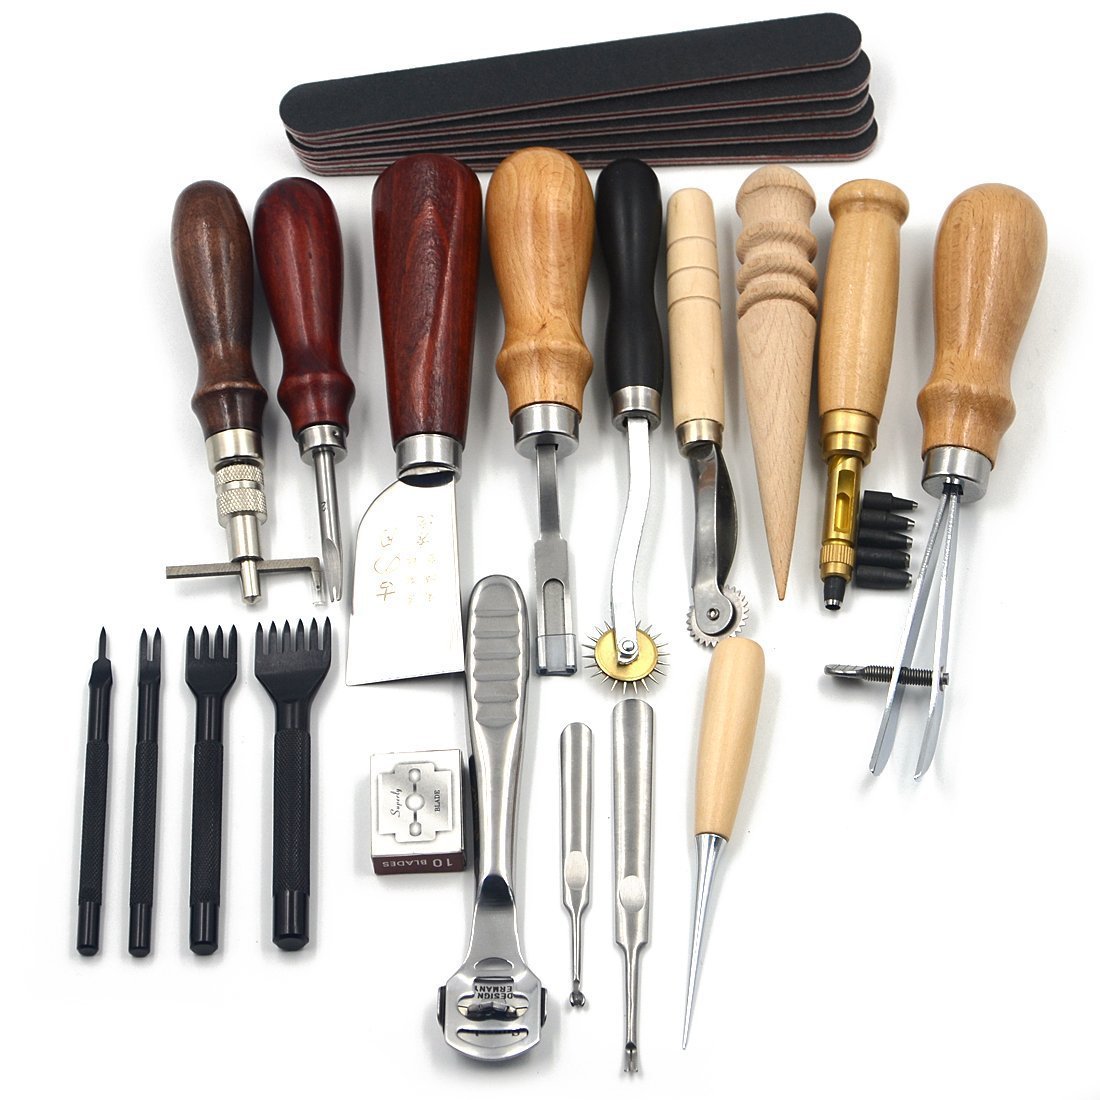 Leather Craft Punch Tools Kit Stitching Carving Working Sewing Saddle Groover 18pcs/Set